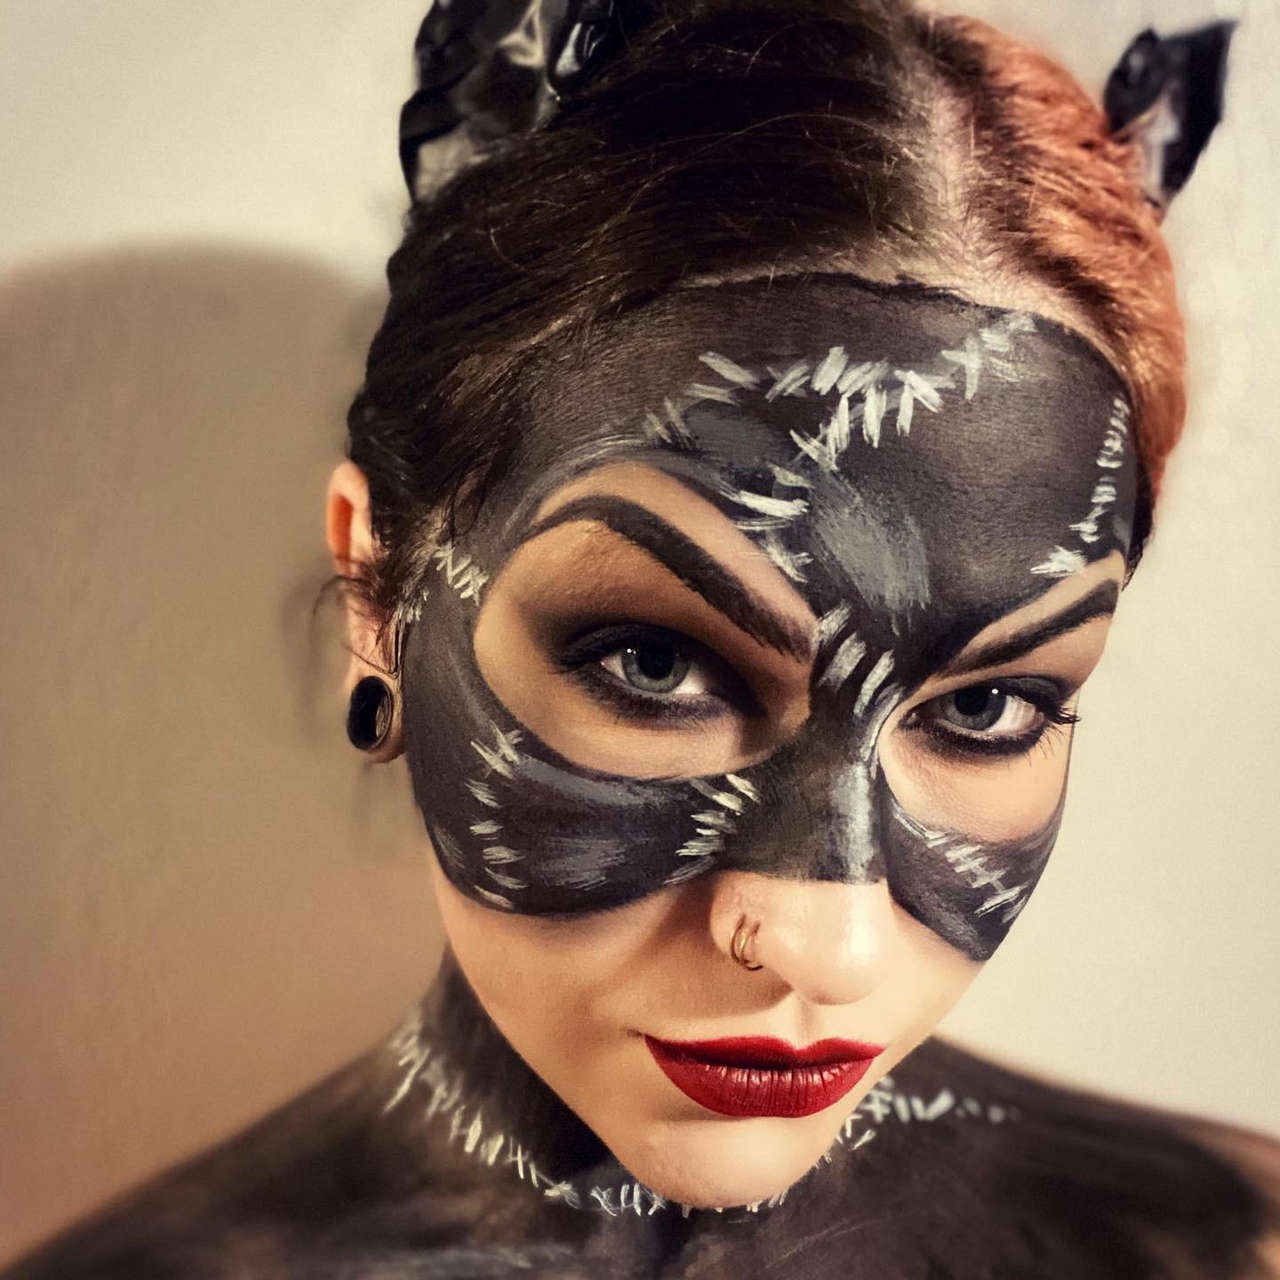 Some Catwoman Facepaint Action By Self Evilyn Obsidian Michelle Pfeiffer Inspire